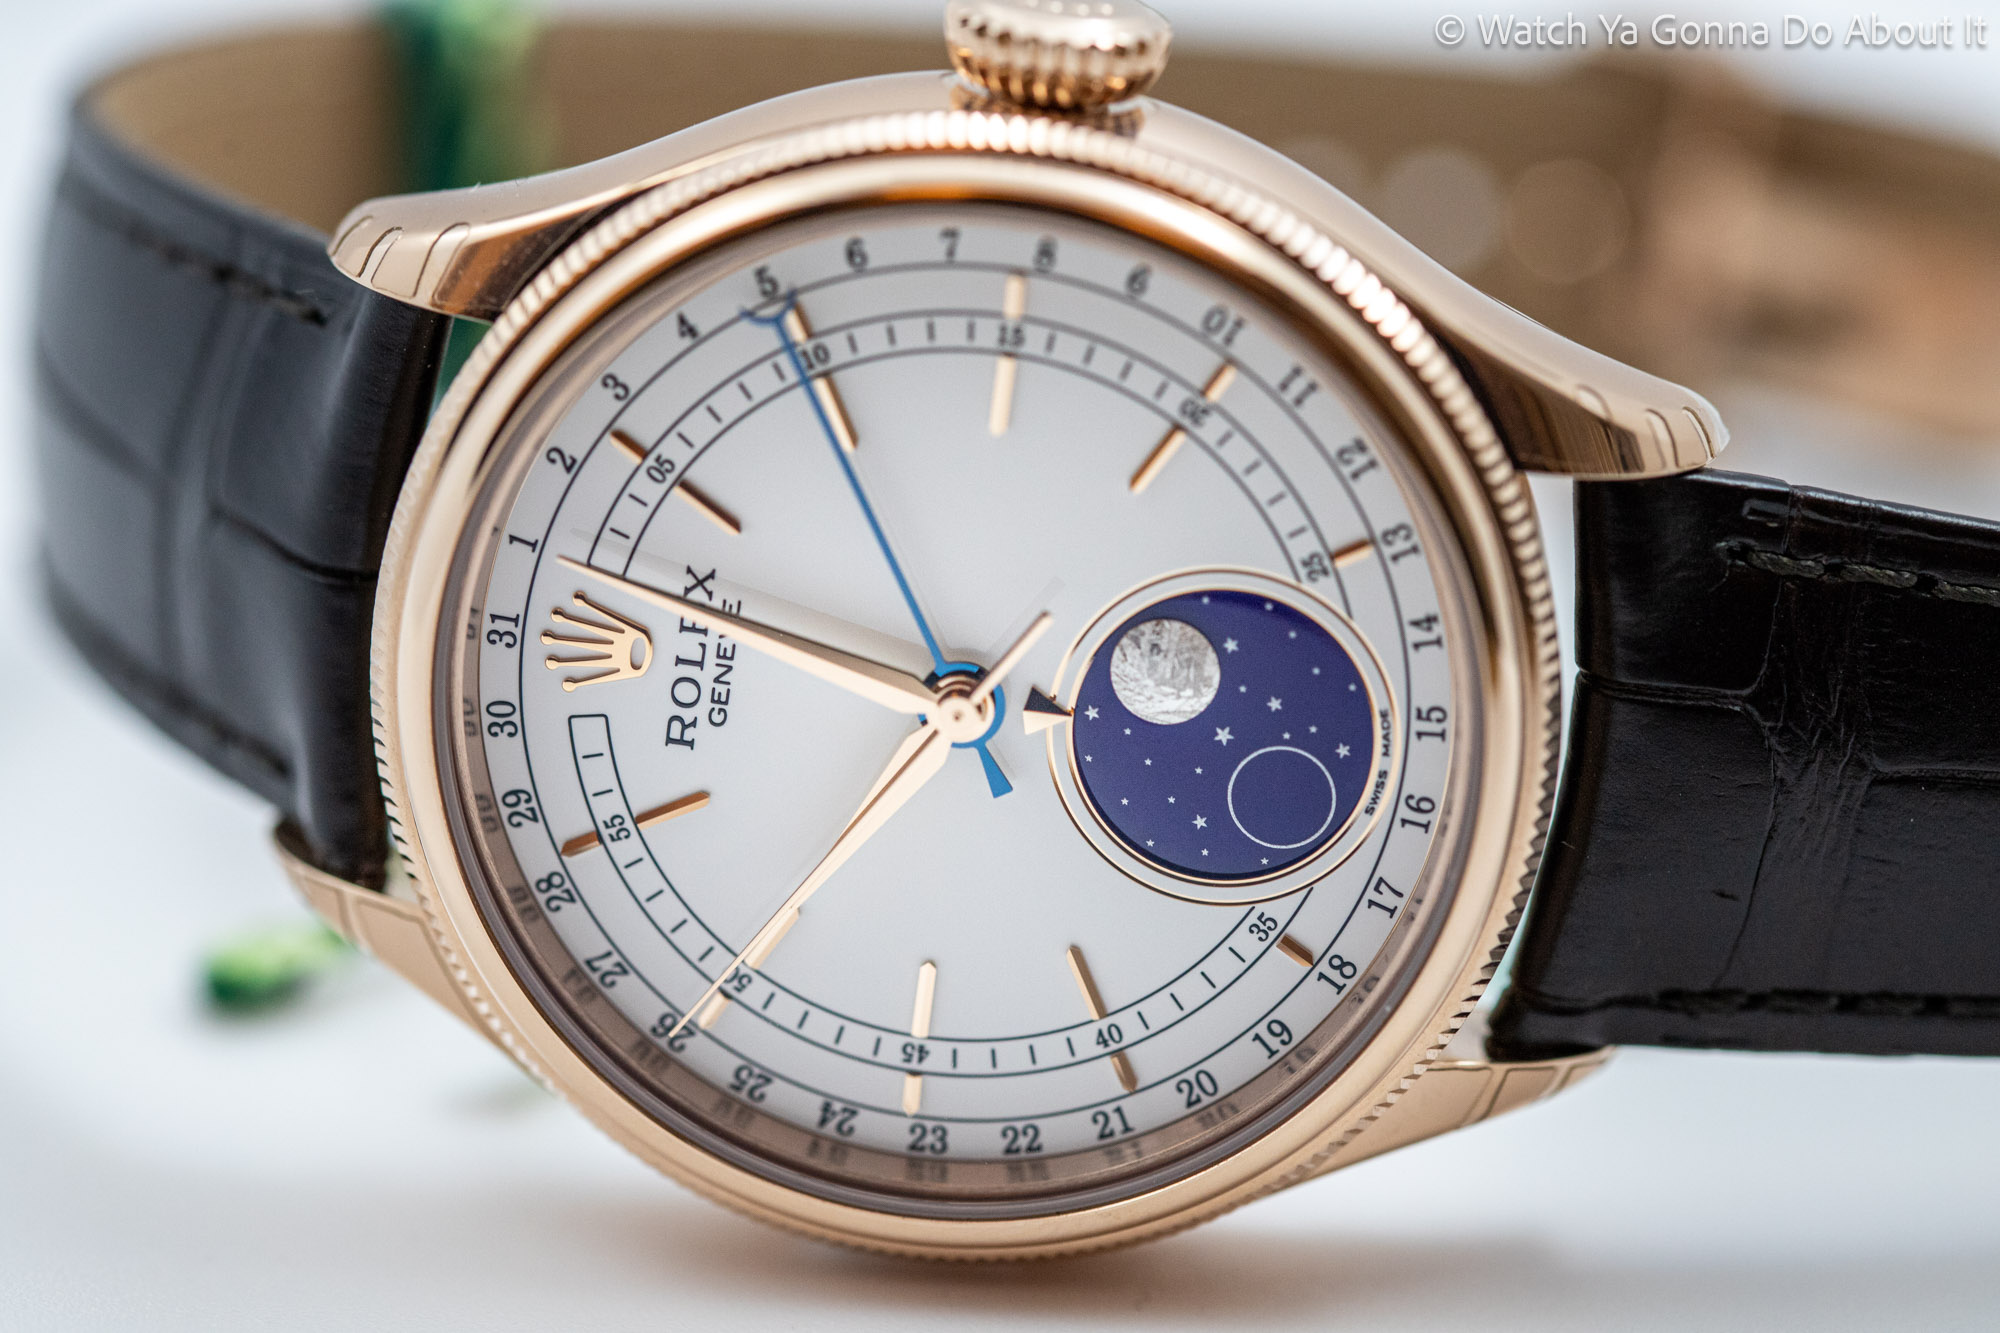 Rolex Cellini Moonphase Review: Rolex's Most Underrated Watch